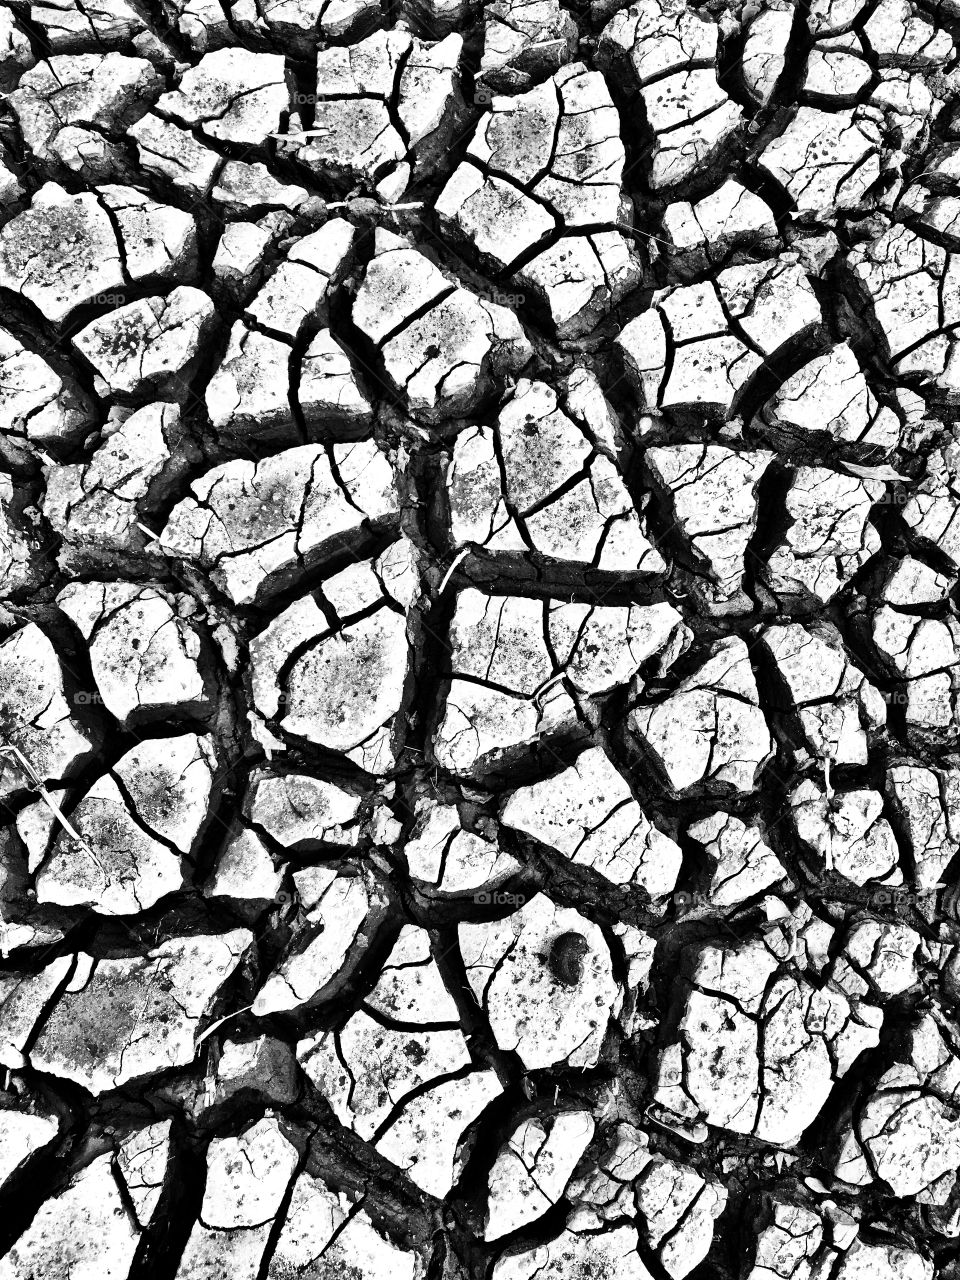 Cracked earth, black and white texture 